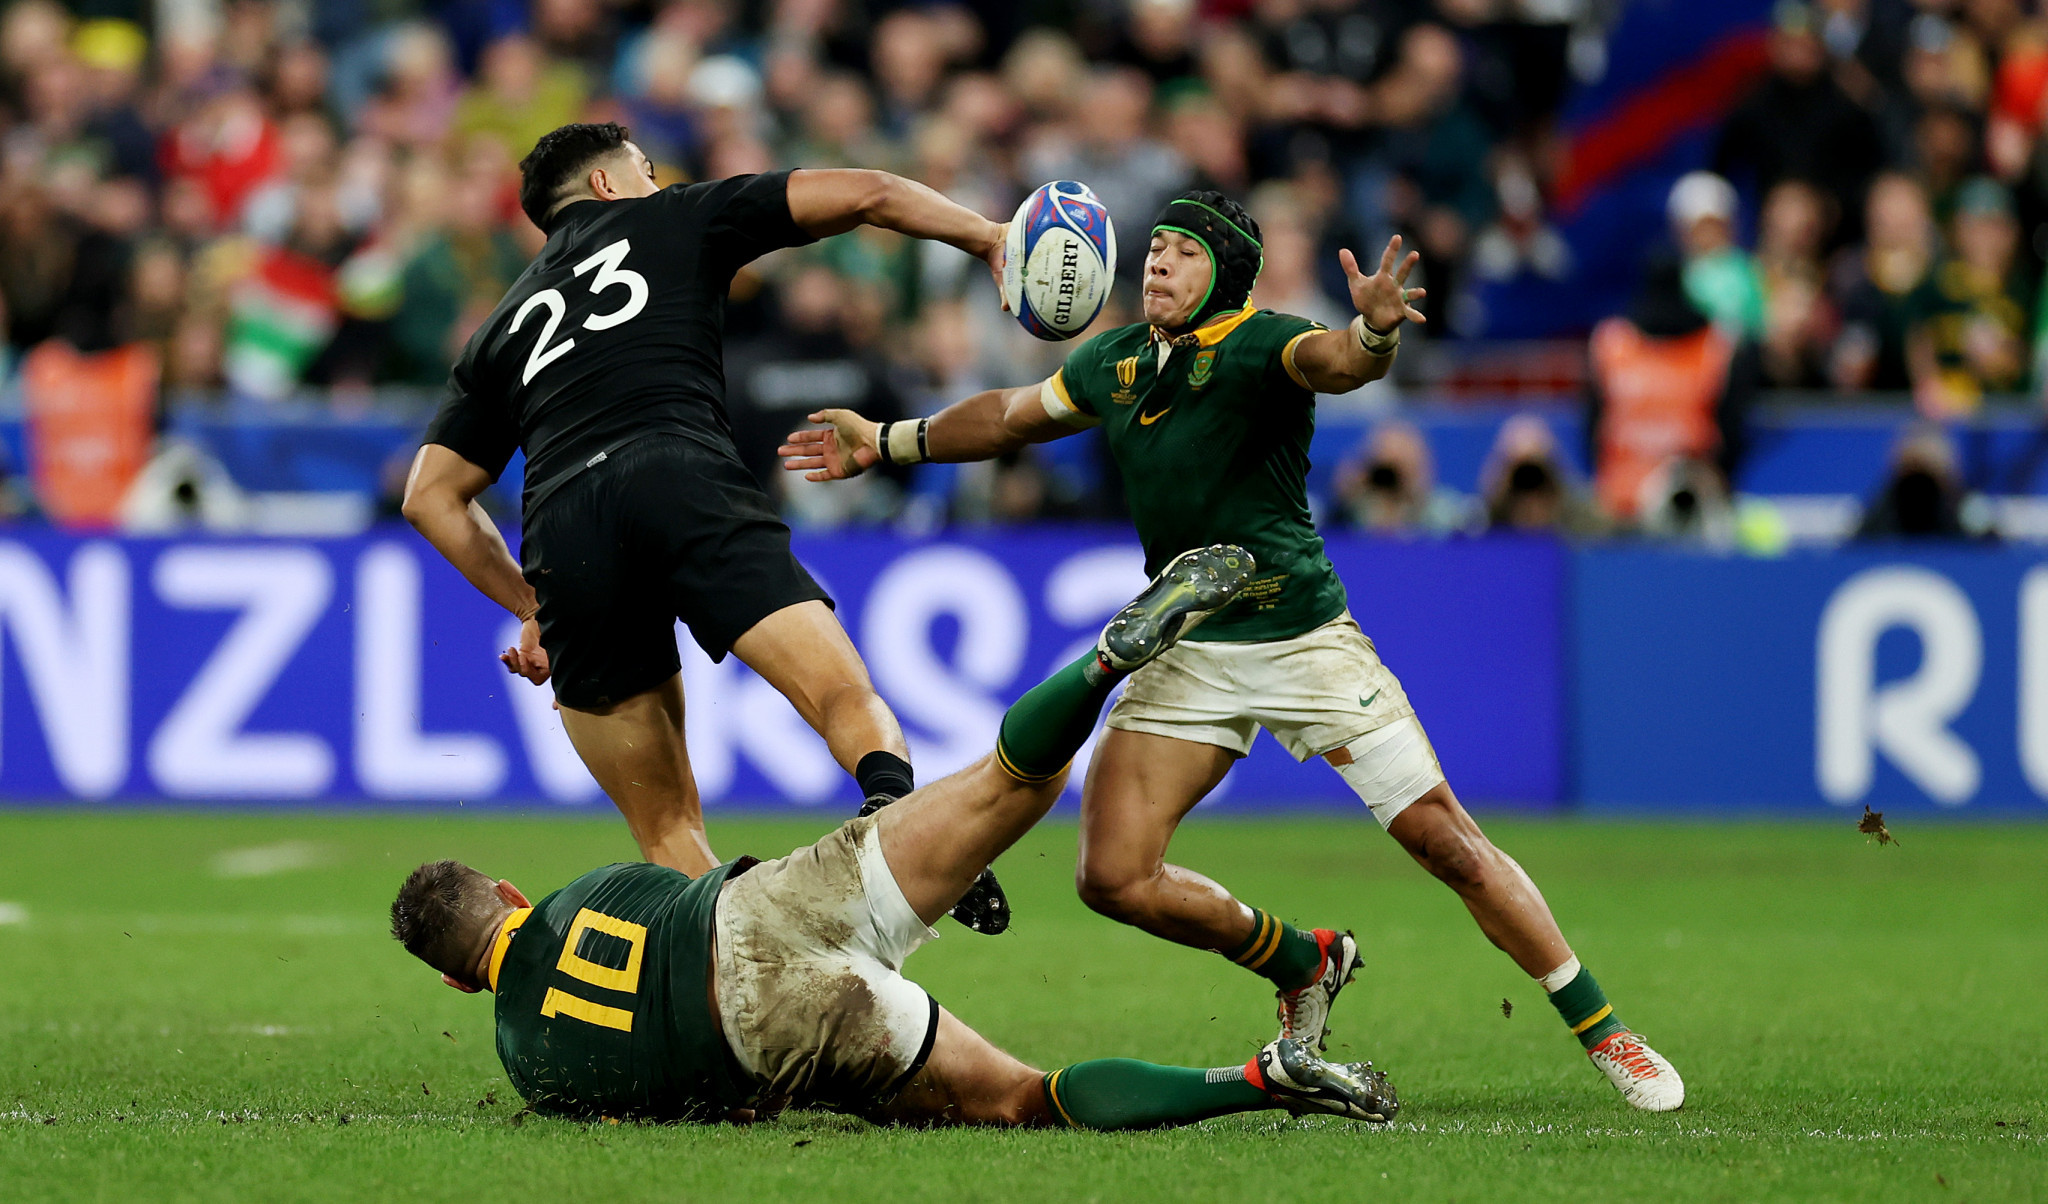 Both sides were down to 14 men in the latter stages after Cheslin Kolbe, right, was sin-binned for a deliberate knock-on ©Getty Images